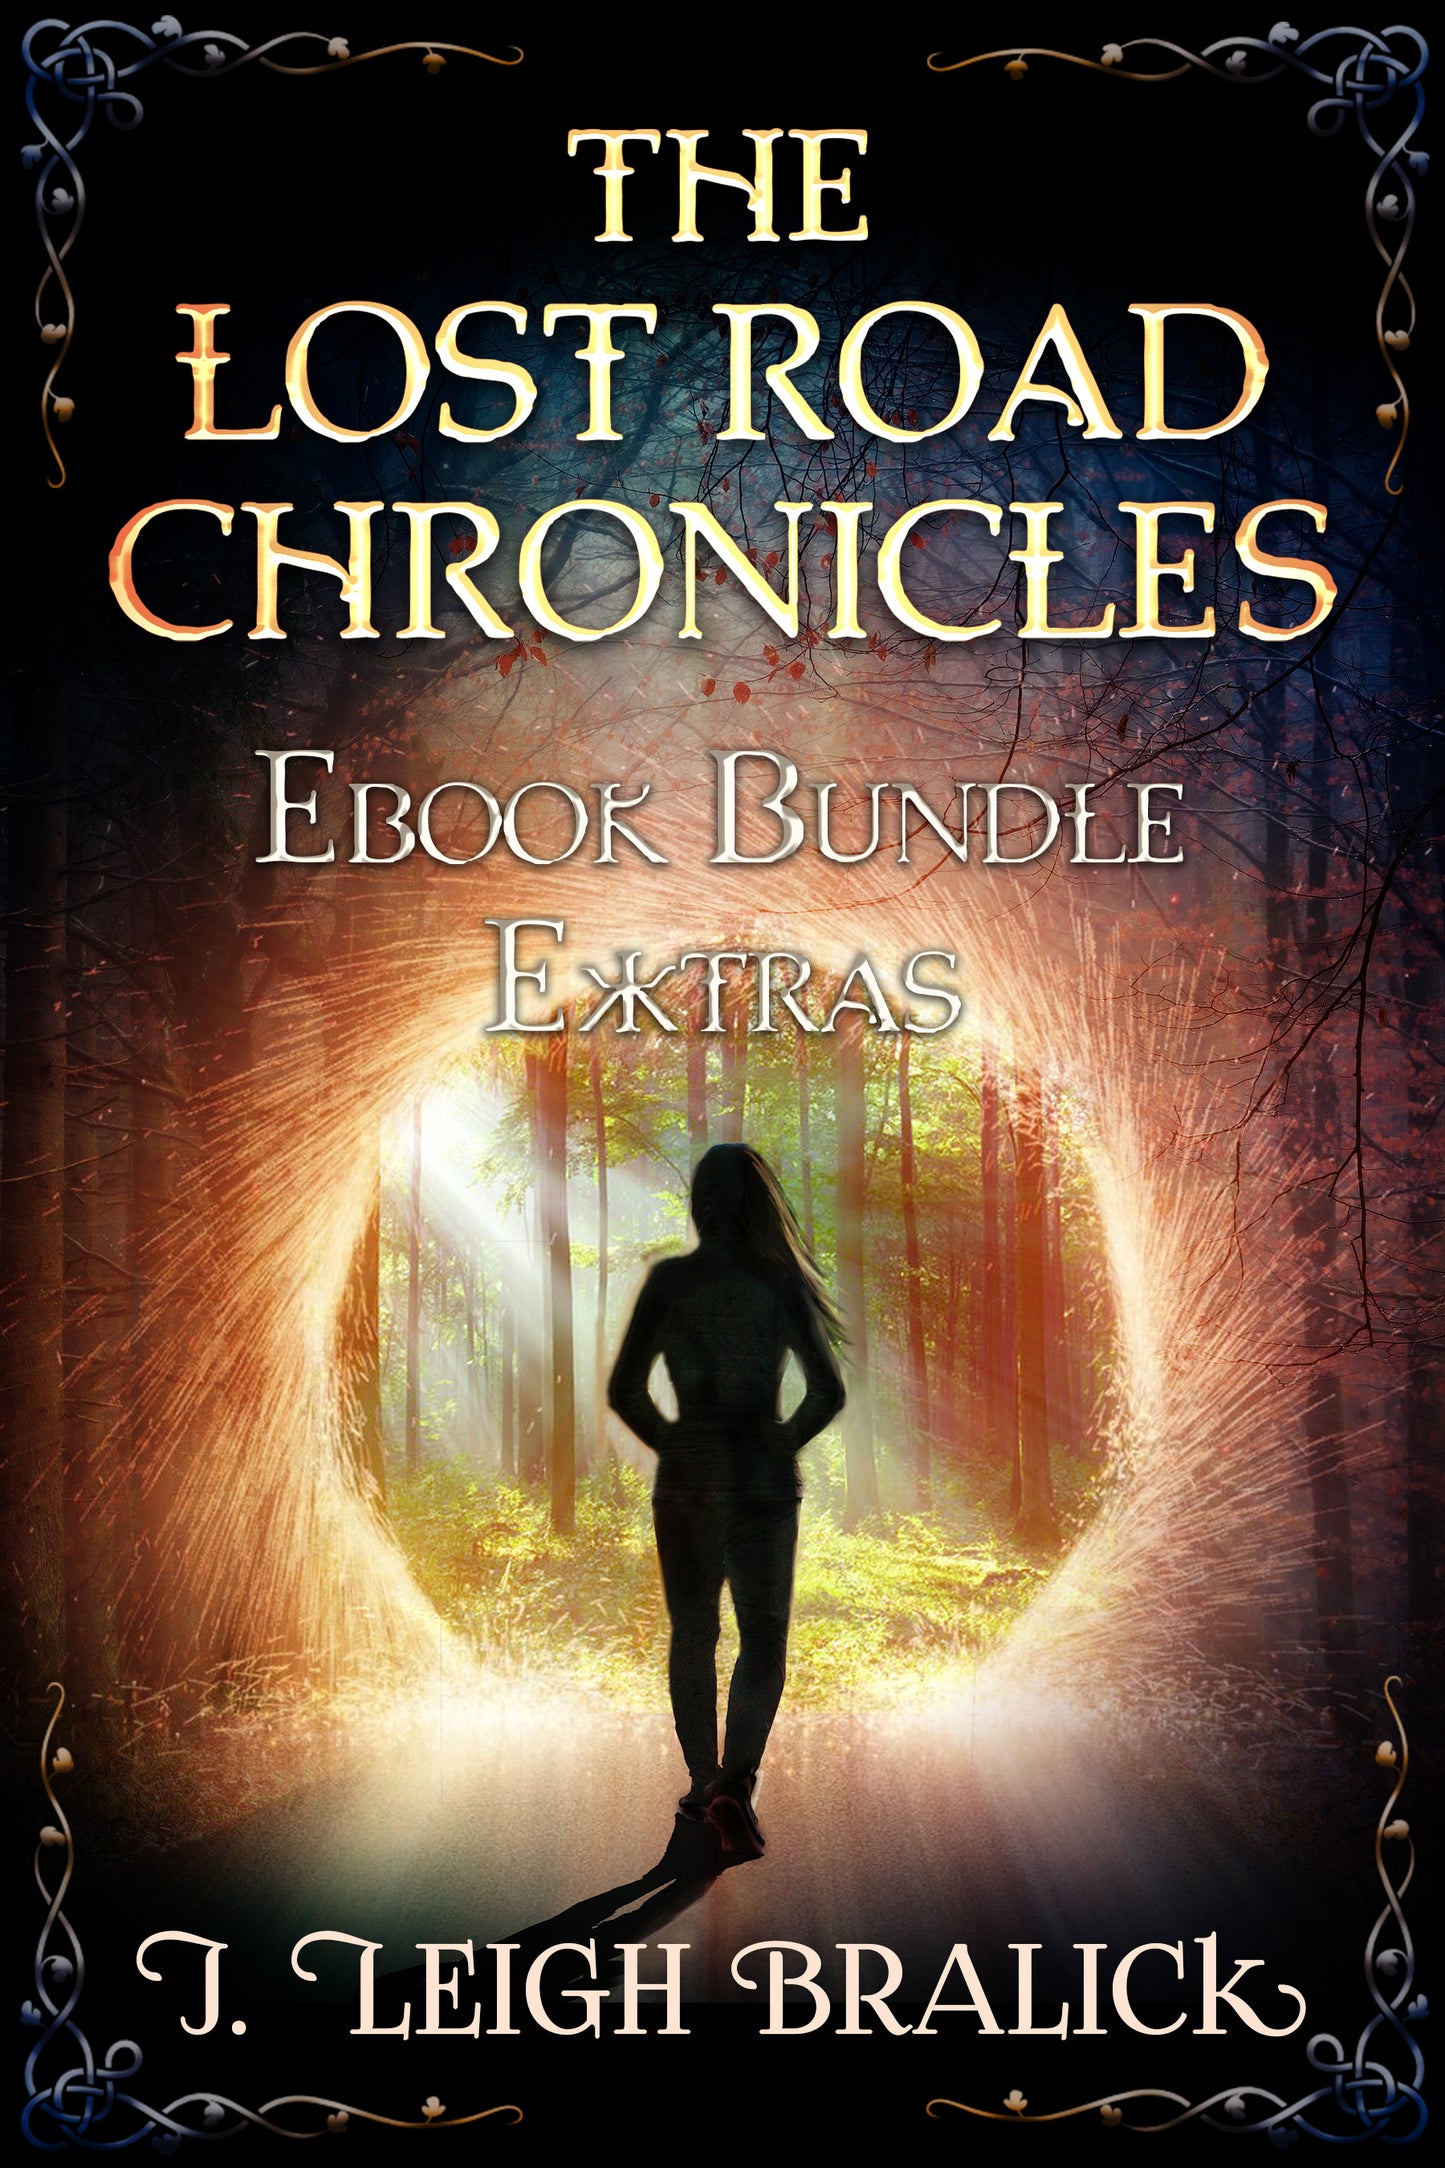 The Lost Road Chronicles Ebook Bundle